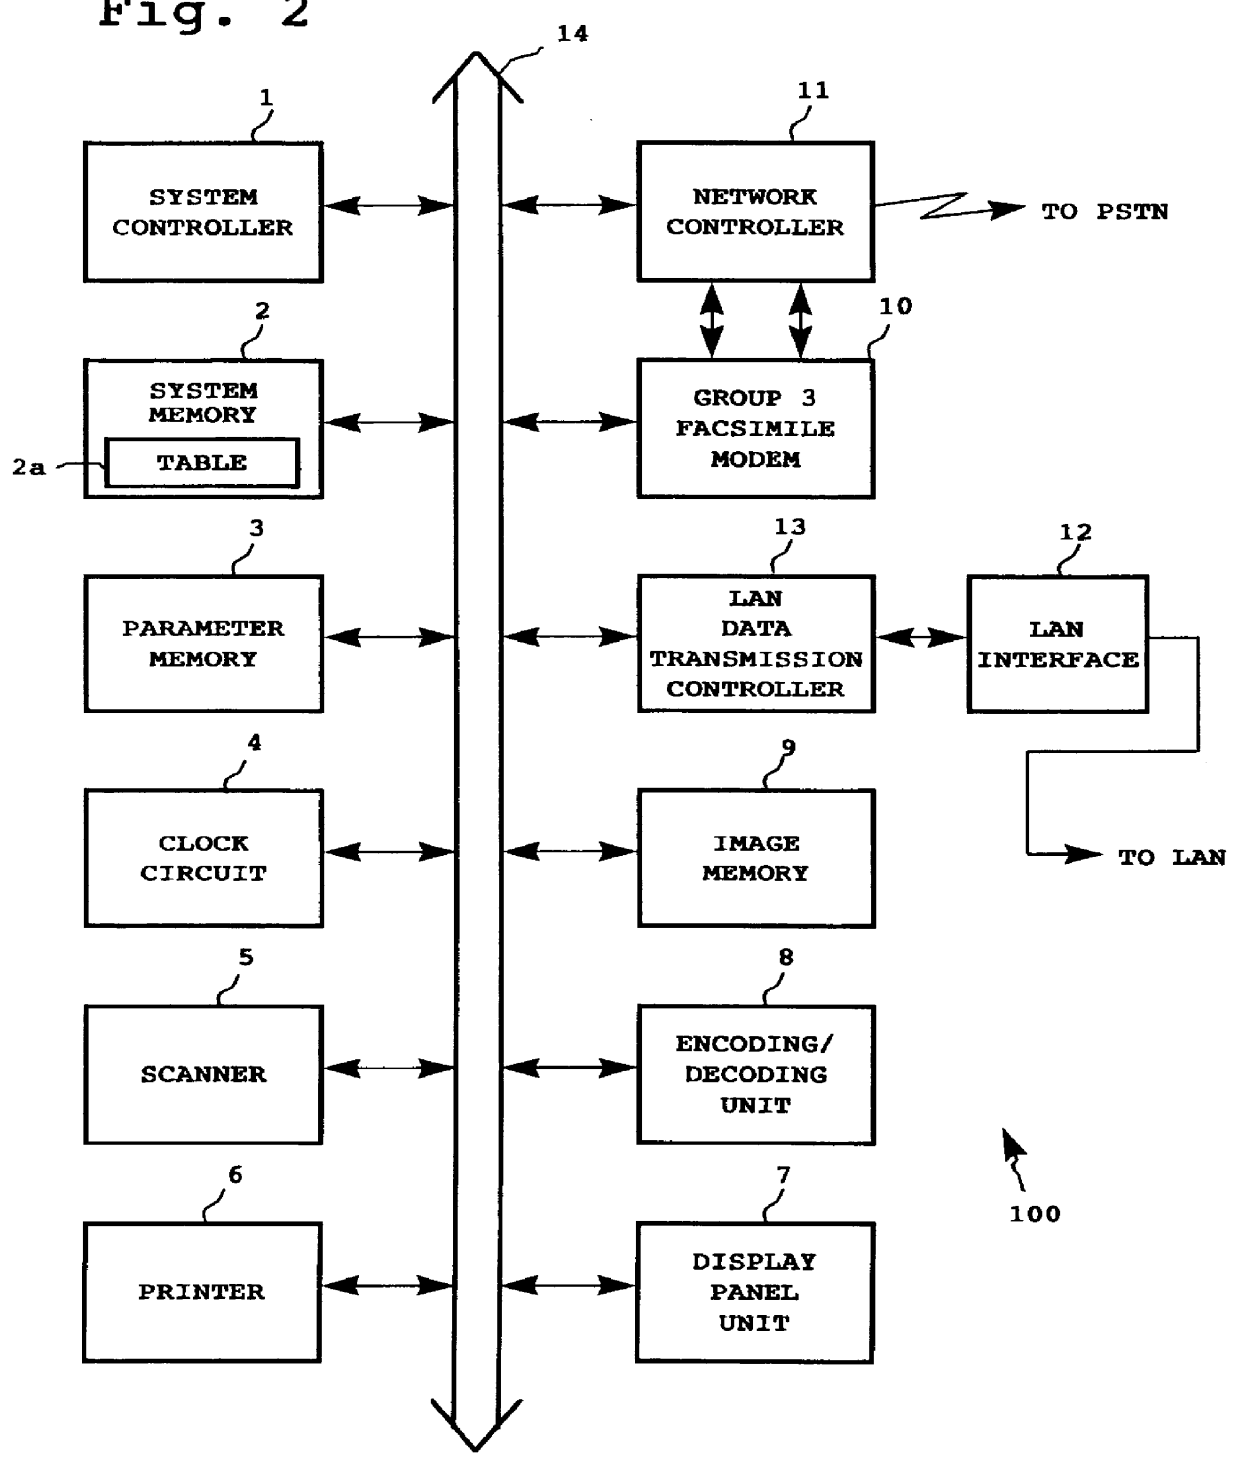 Network facsimile apparatus capable of E-mail communications